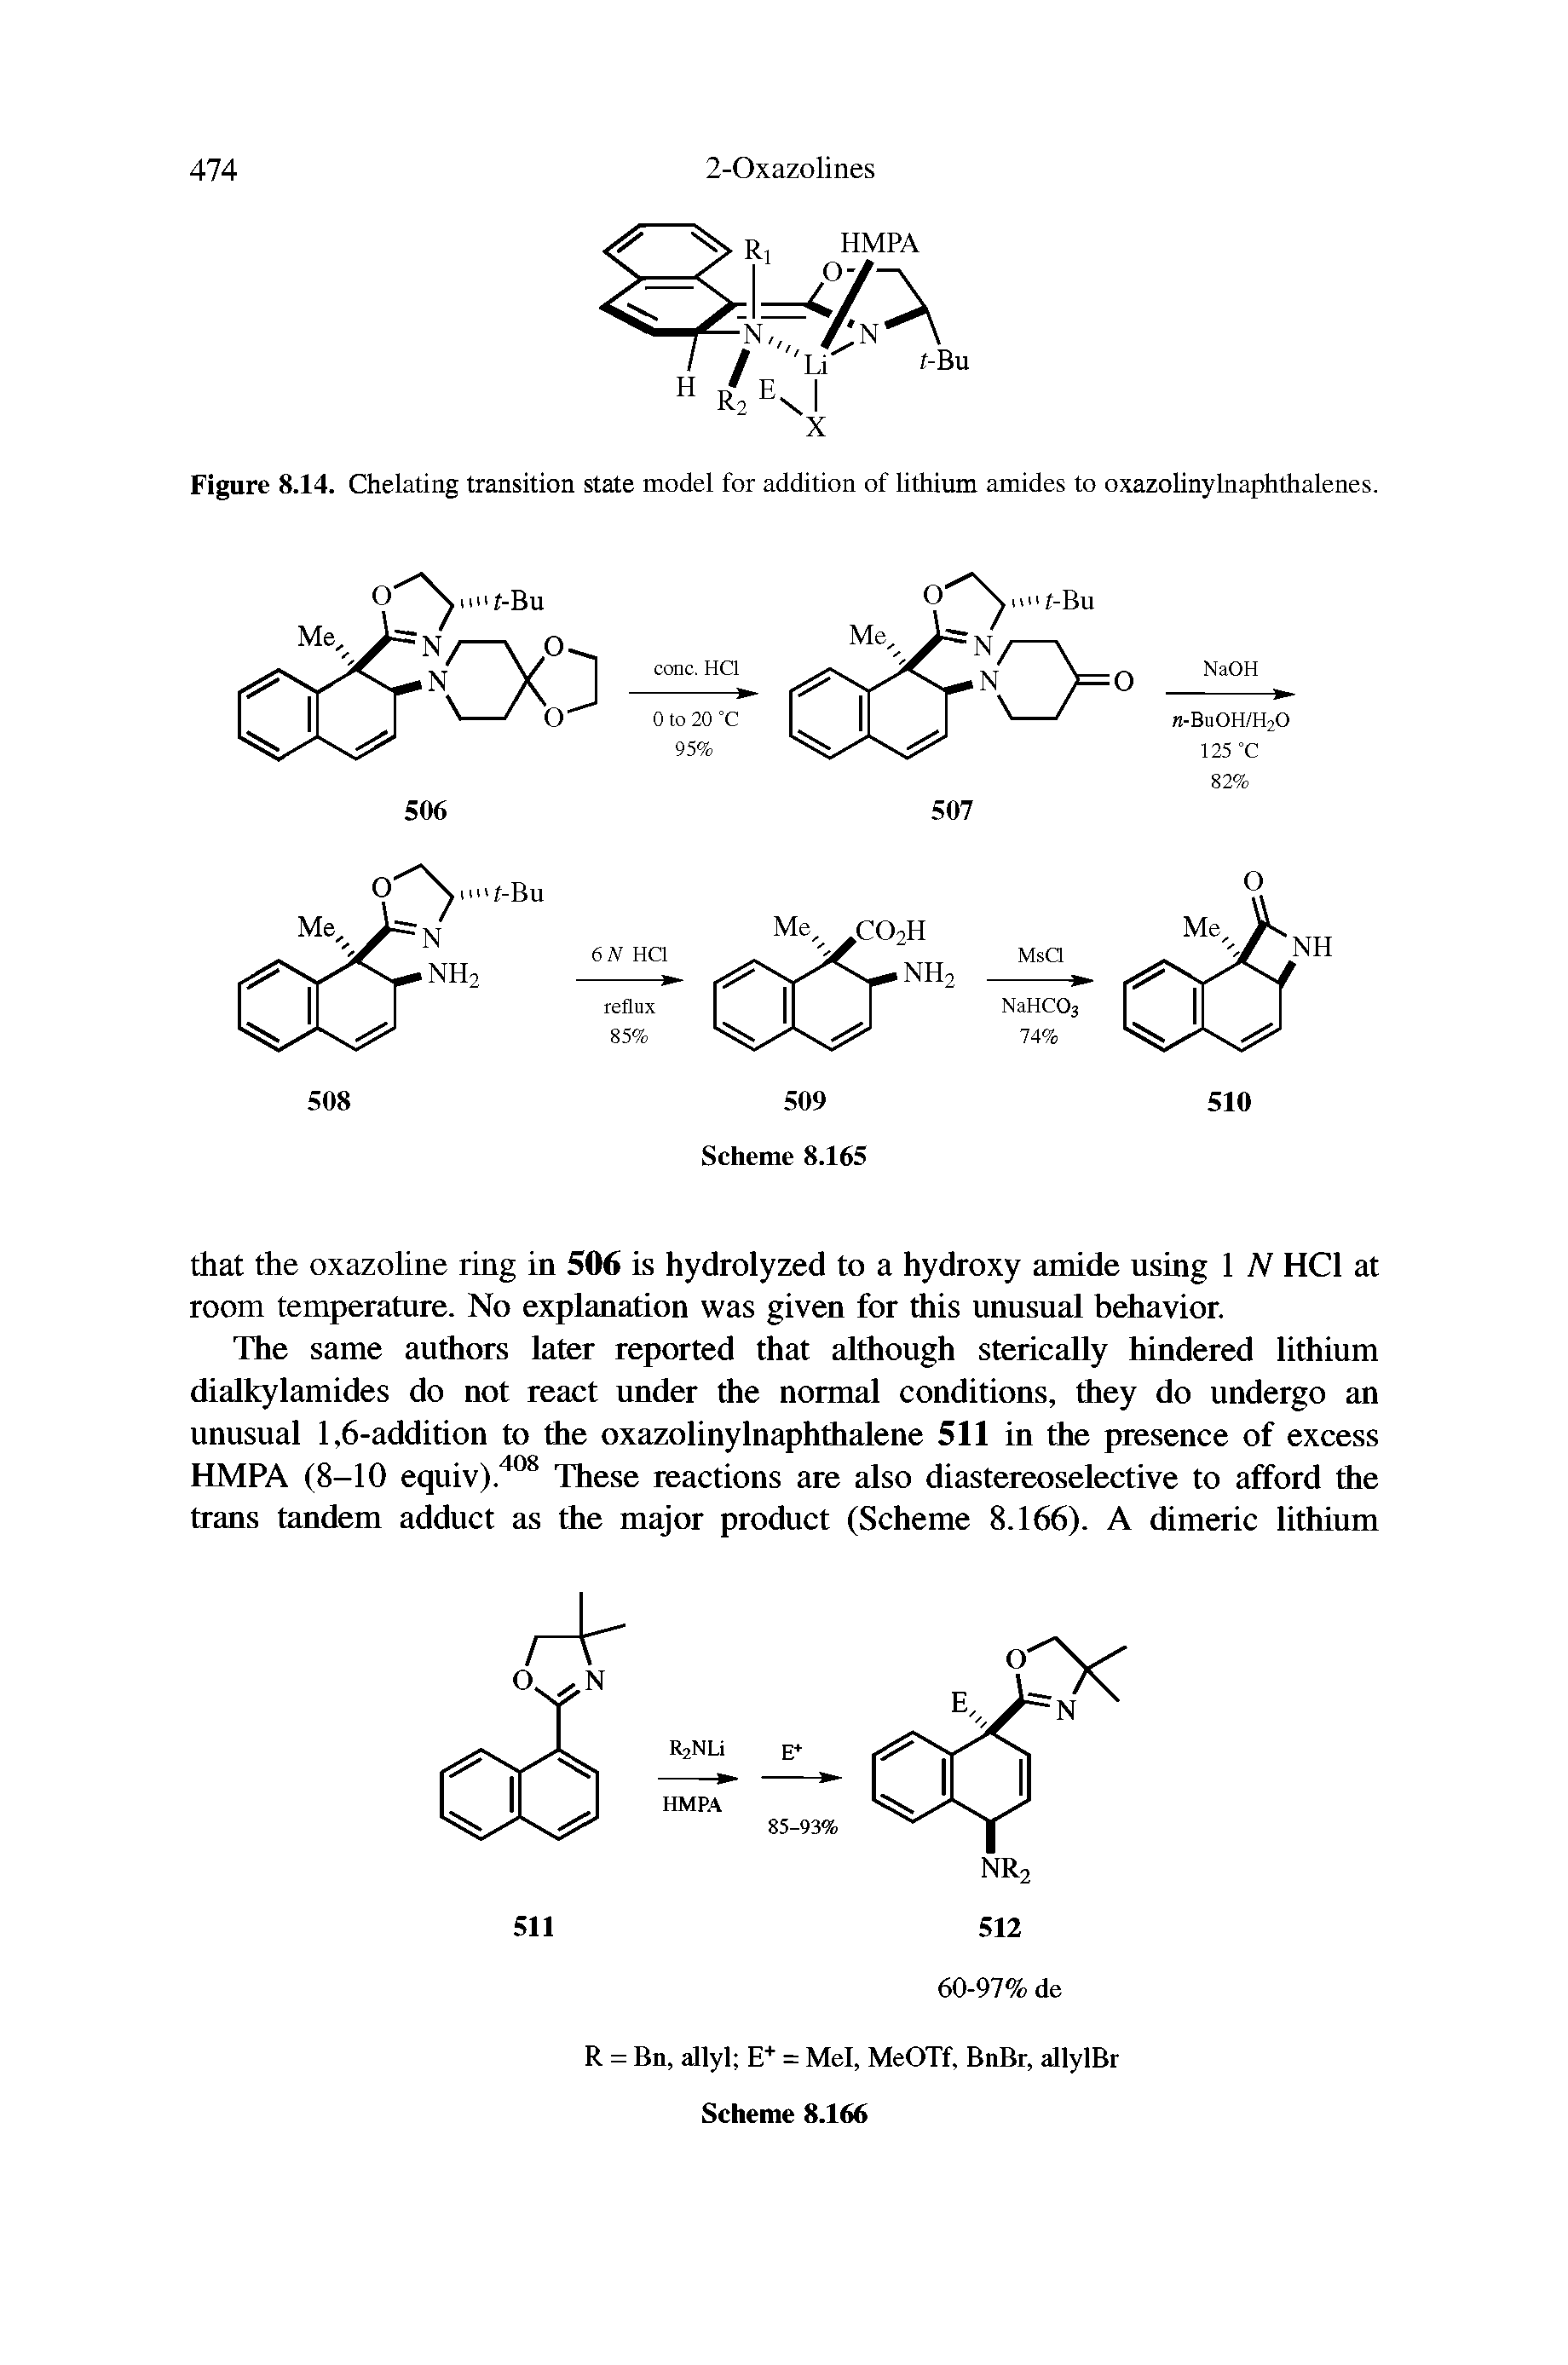 Figure 8.14. Chelating transition state model for addition of lithium amides to oxazolinylnaphthalenes.